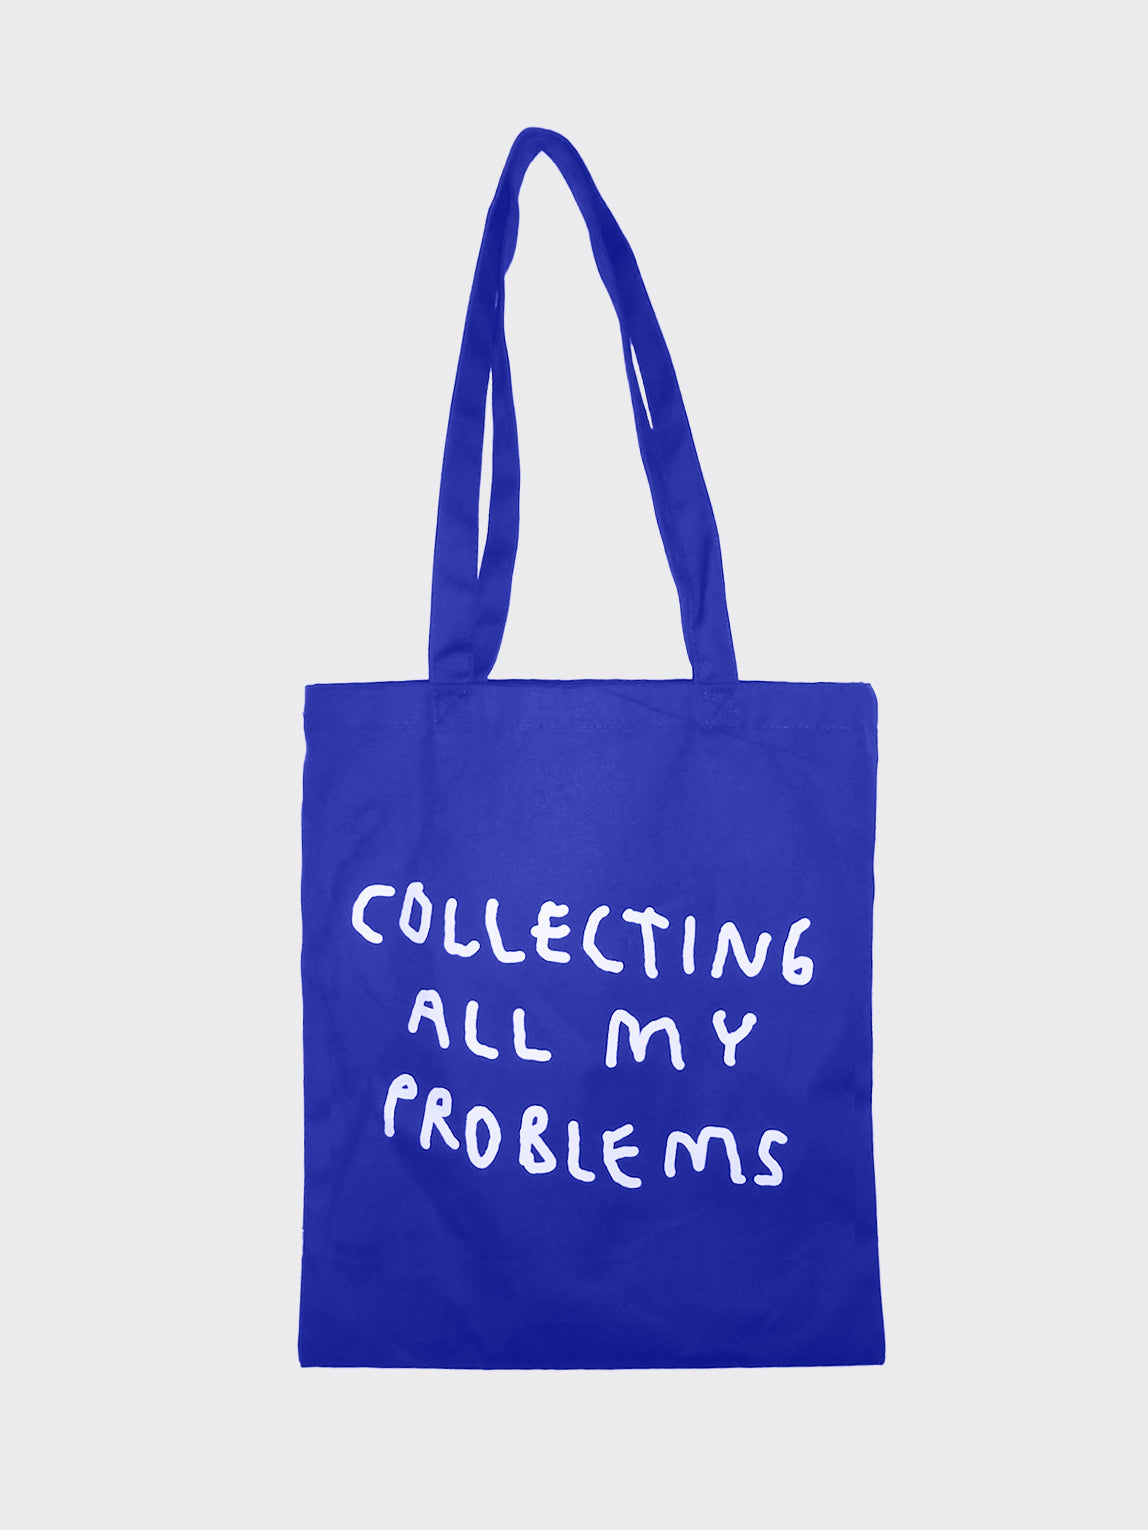 Collecting my problems - blue